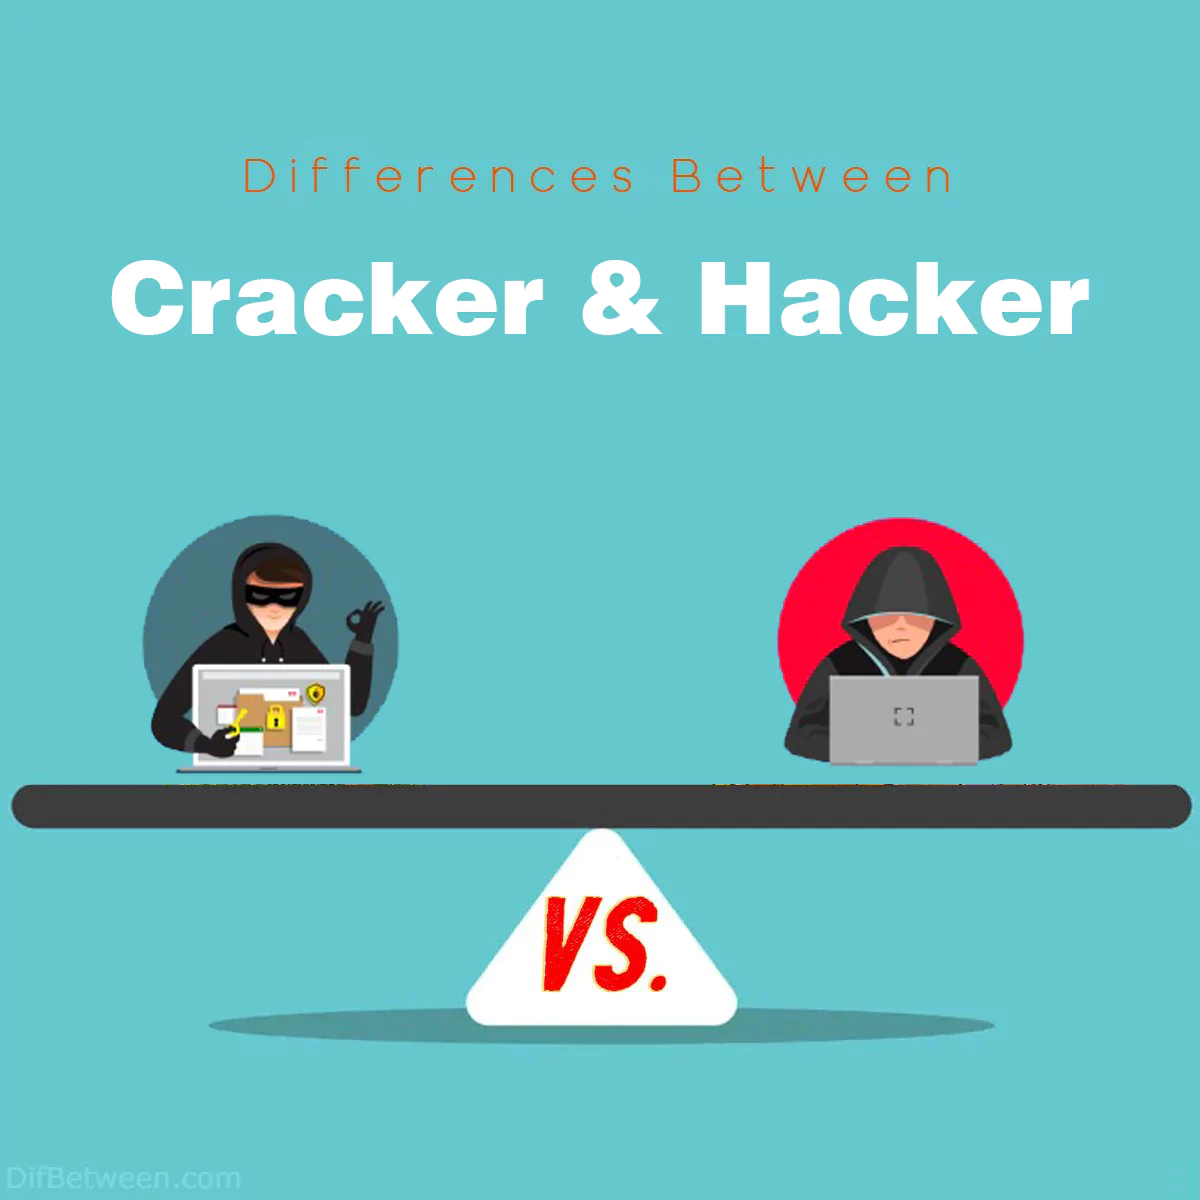 Differences Between Cracker and Hacker